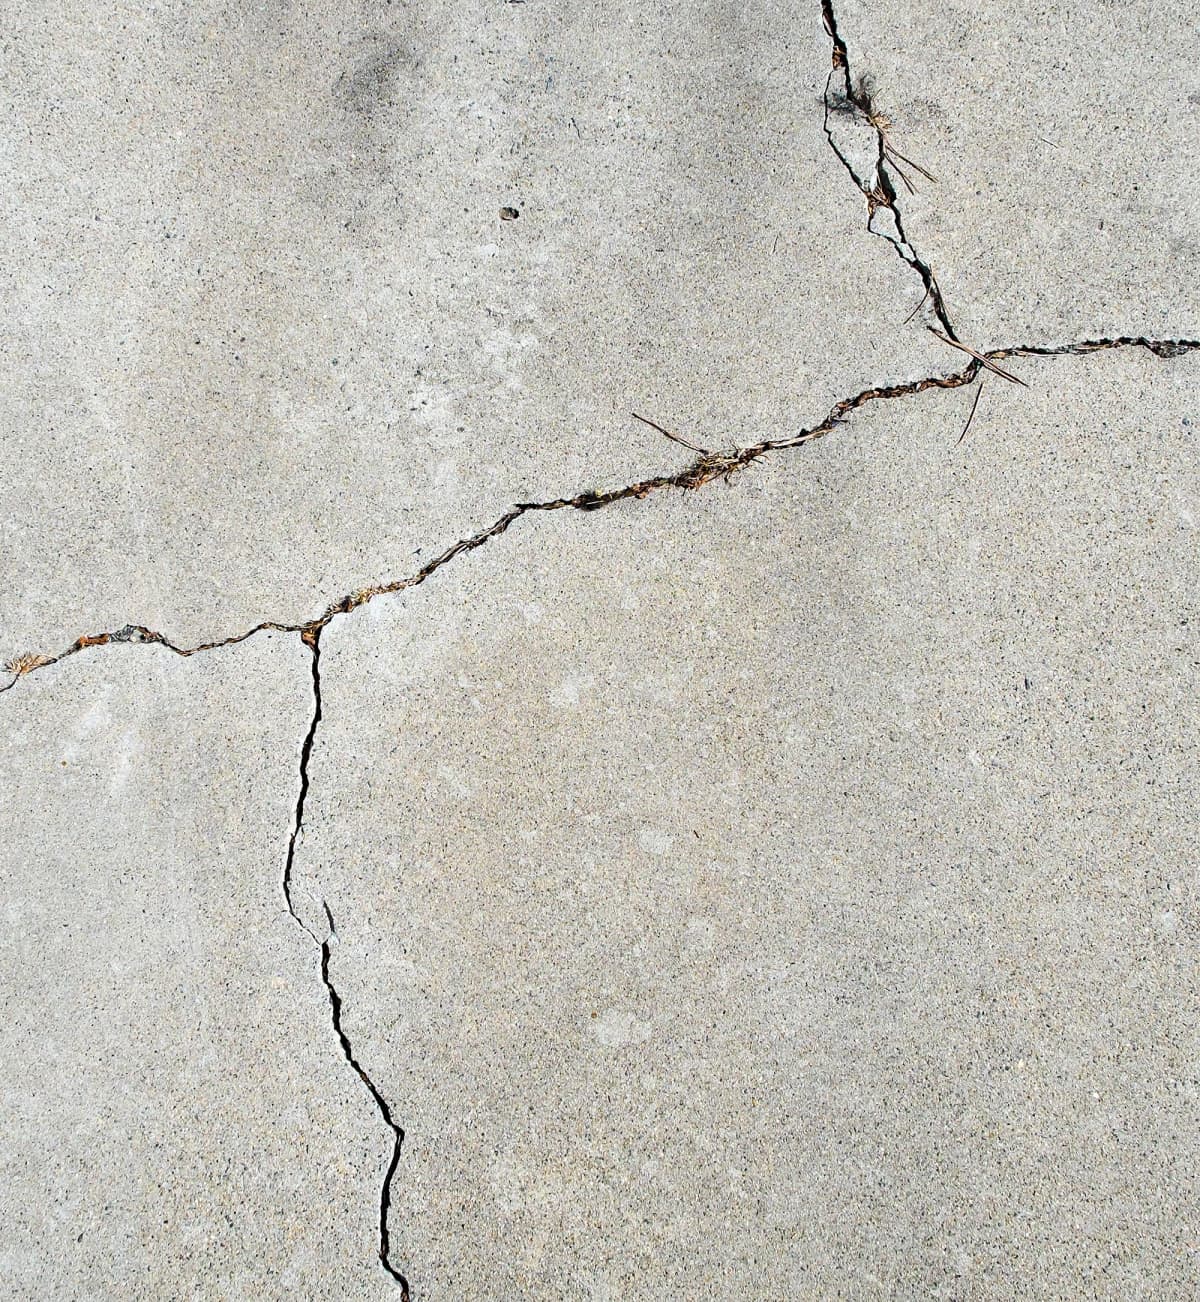 Crack in a cement driveway